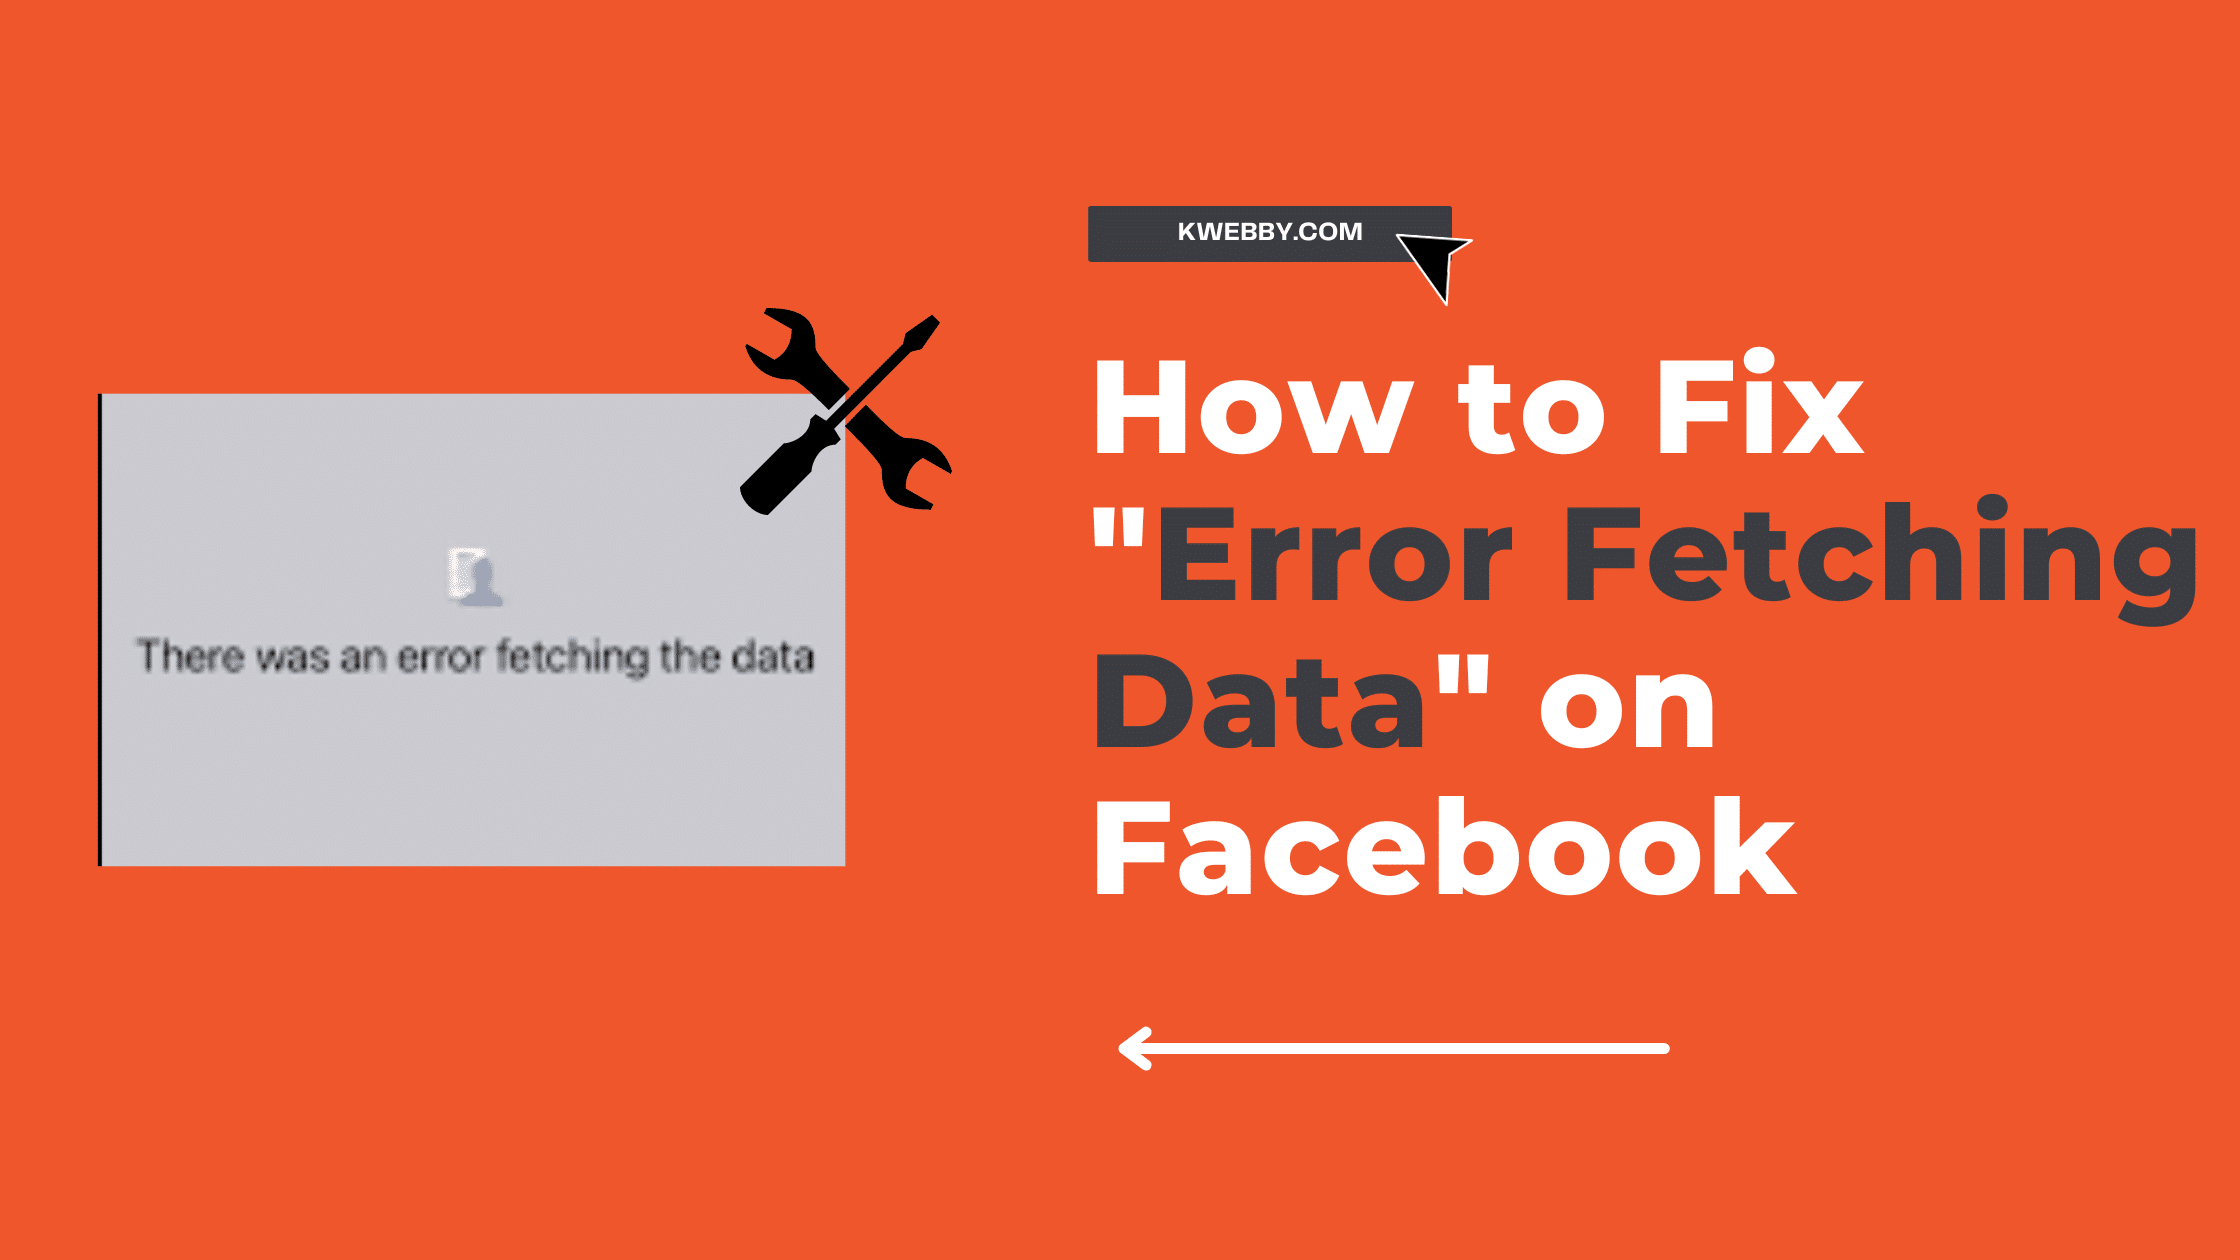 How to Fix “Error Fetching Data” on Facebook (10 Methods to Try)